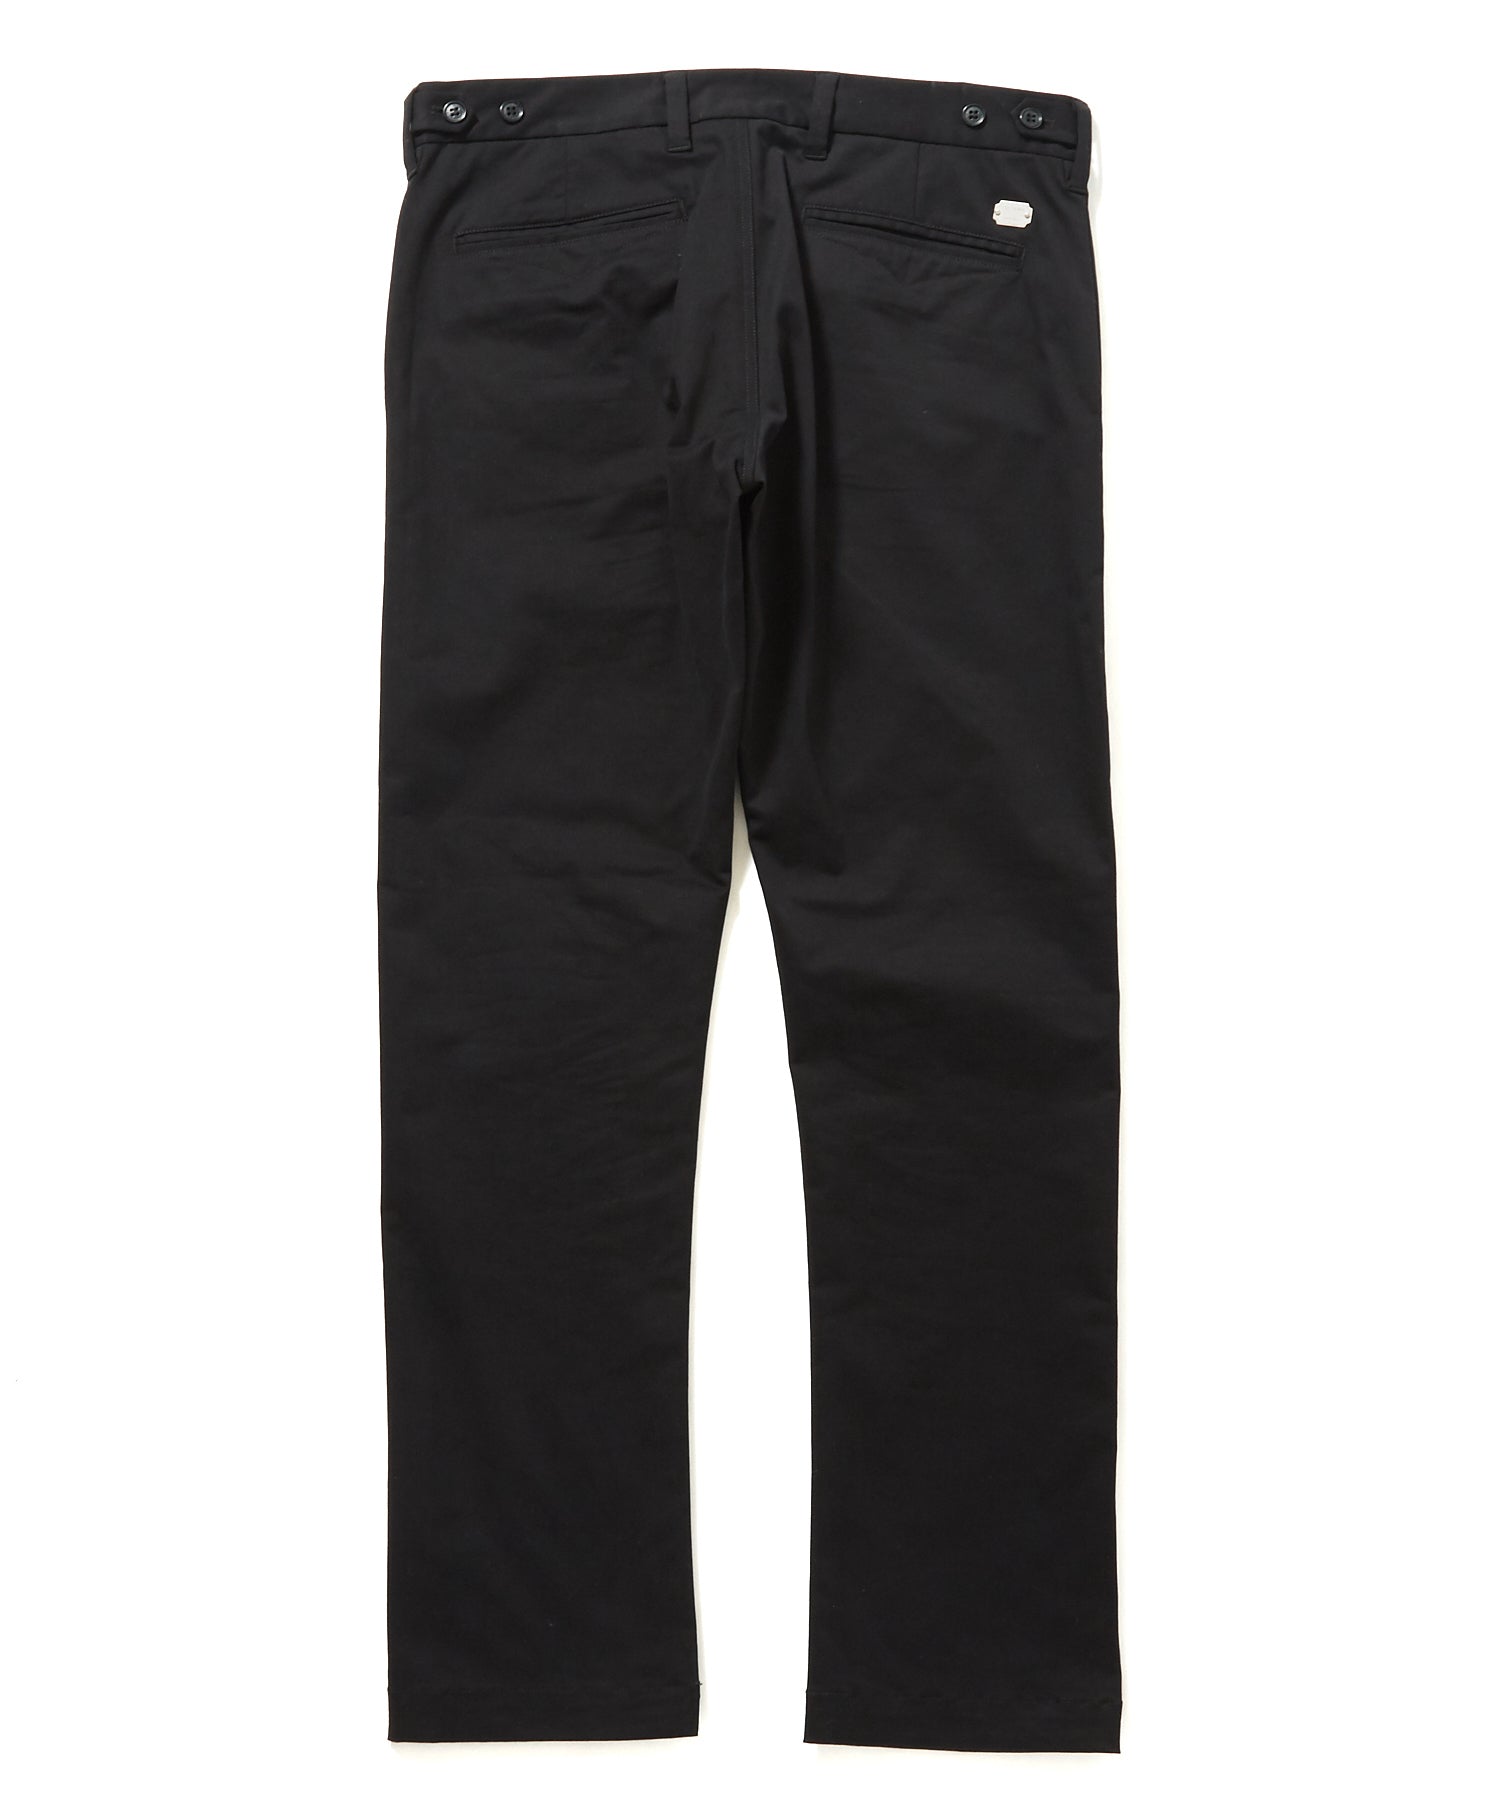 STRETCH CHINO TAPERED SLIM FIT 1550 PANTS